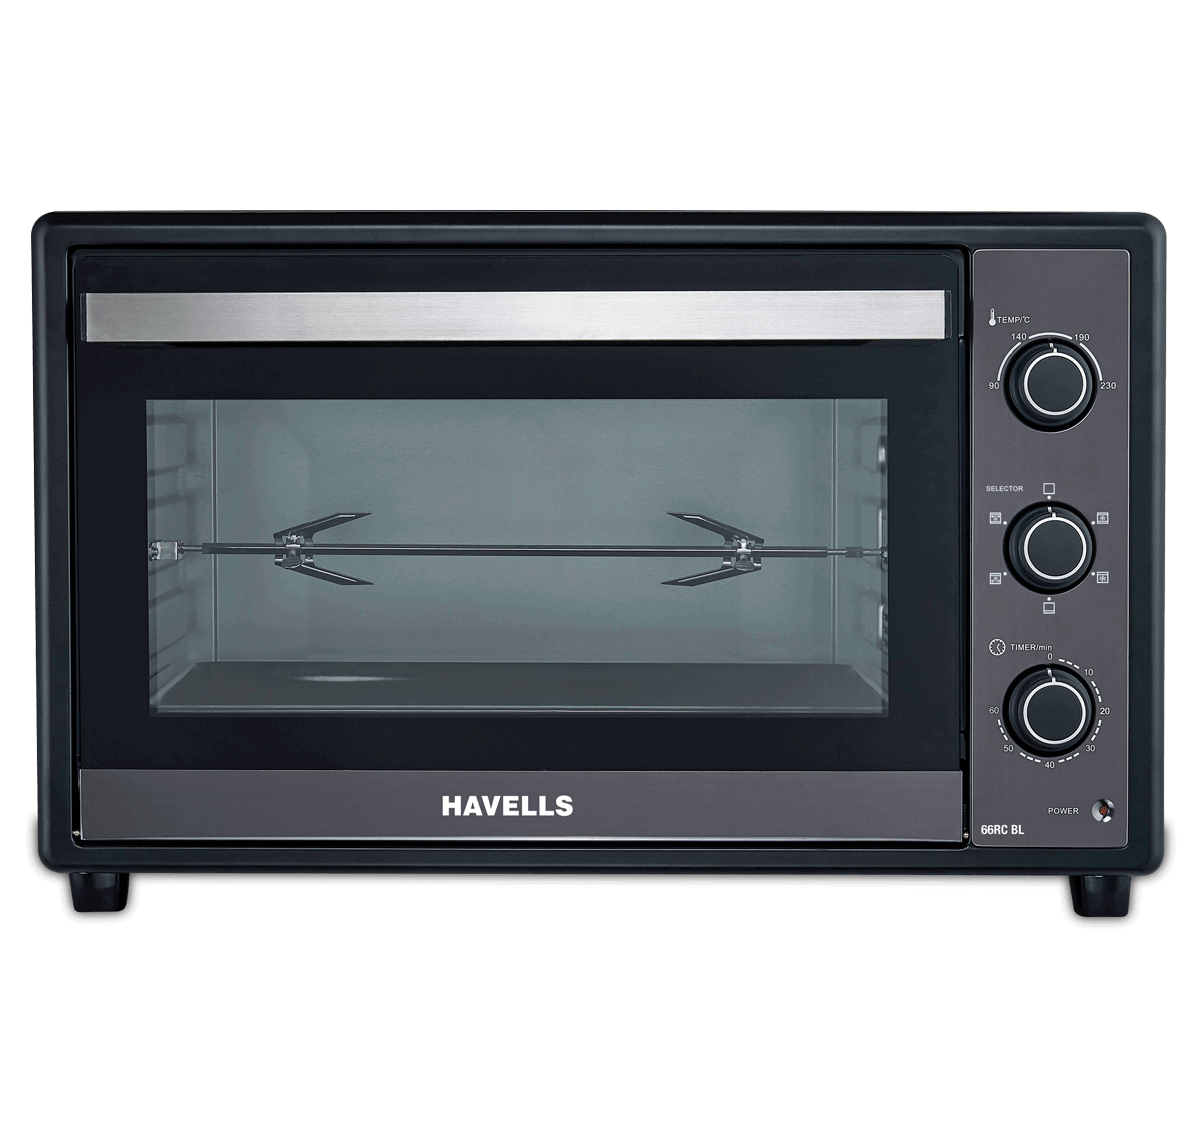 Havells OTG 66RC BL 2200W - Oven Toaster Griller | Buy Online - Havell,New Delhi,Electronics & Home Appliances,Kitchen & Other Appliances